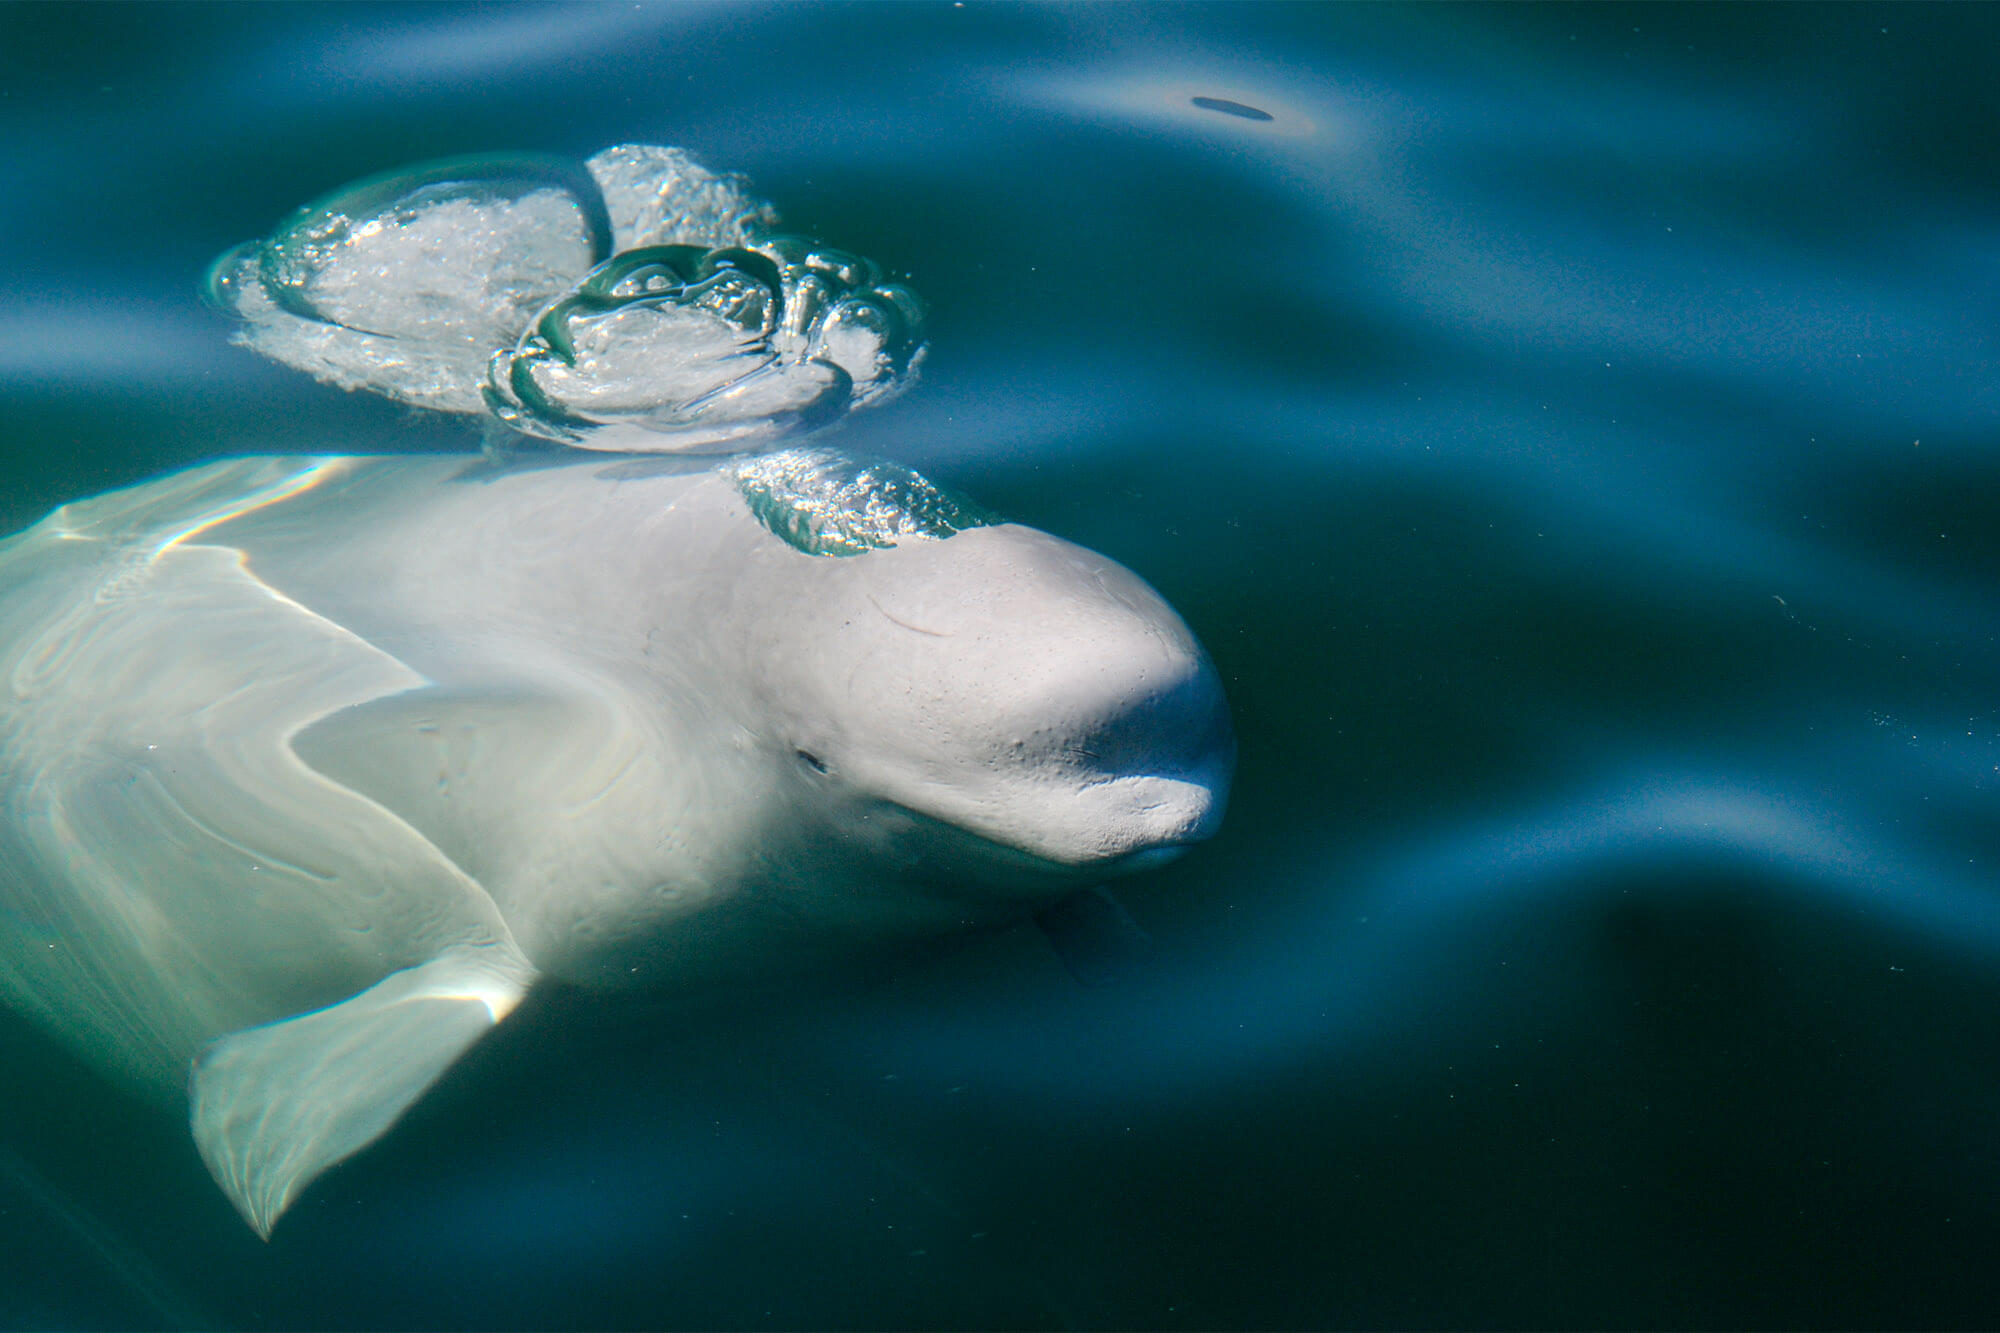 Parasite spread by cats threatens Quebec's endangered belugas